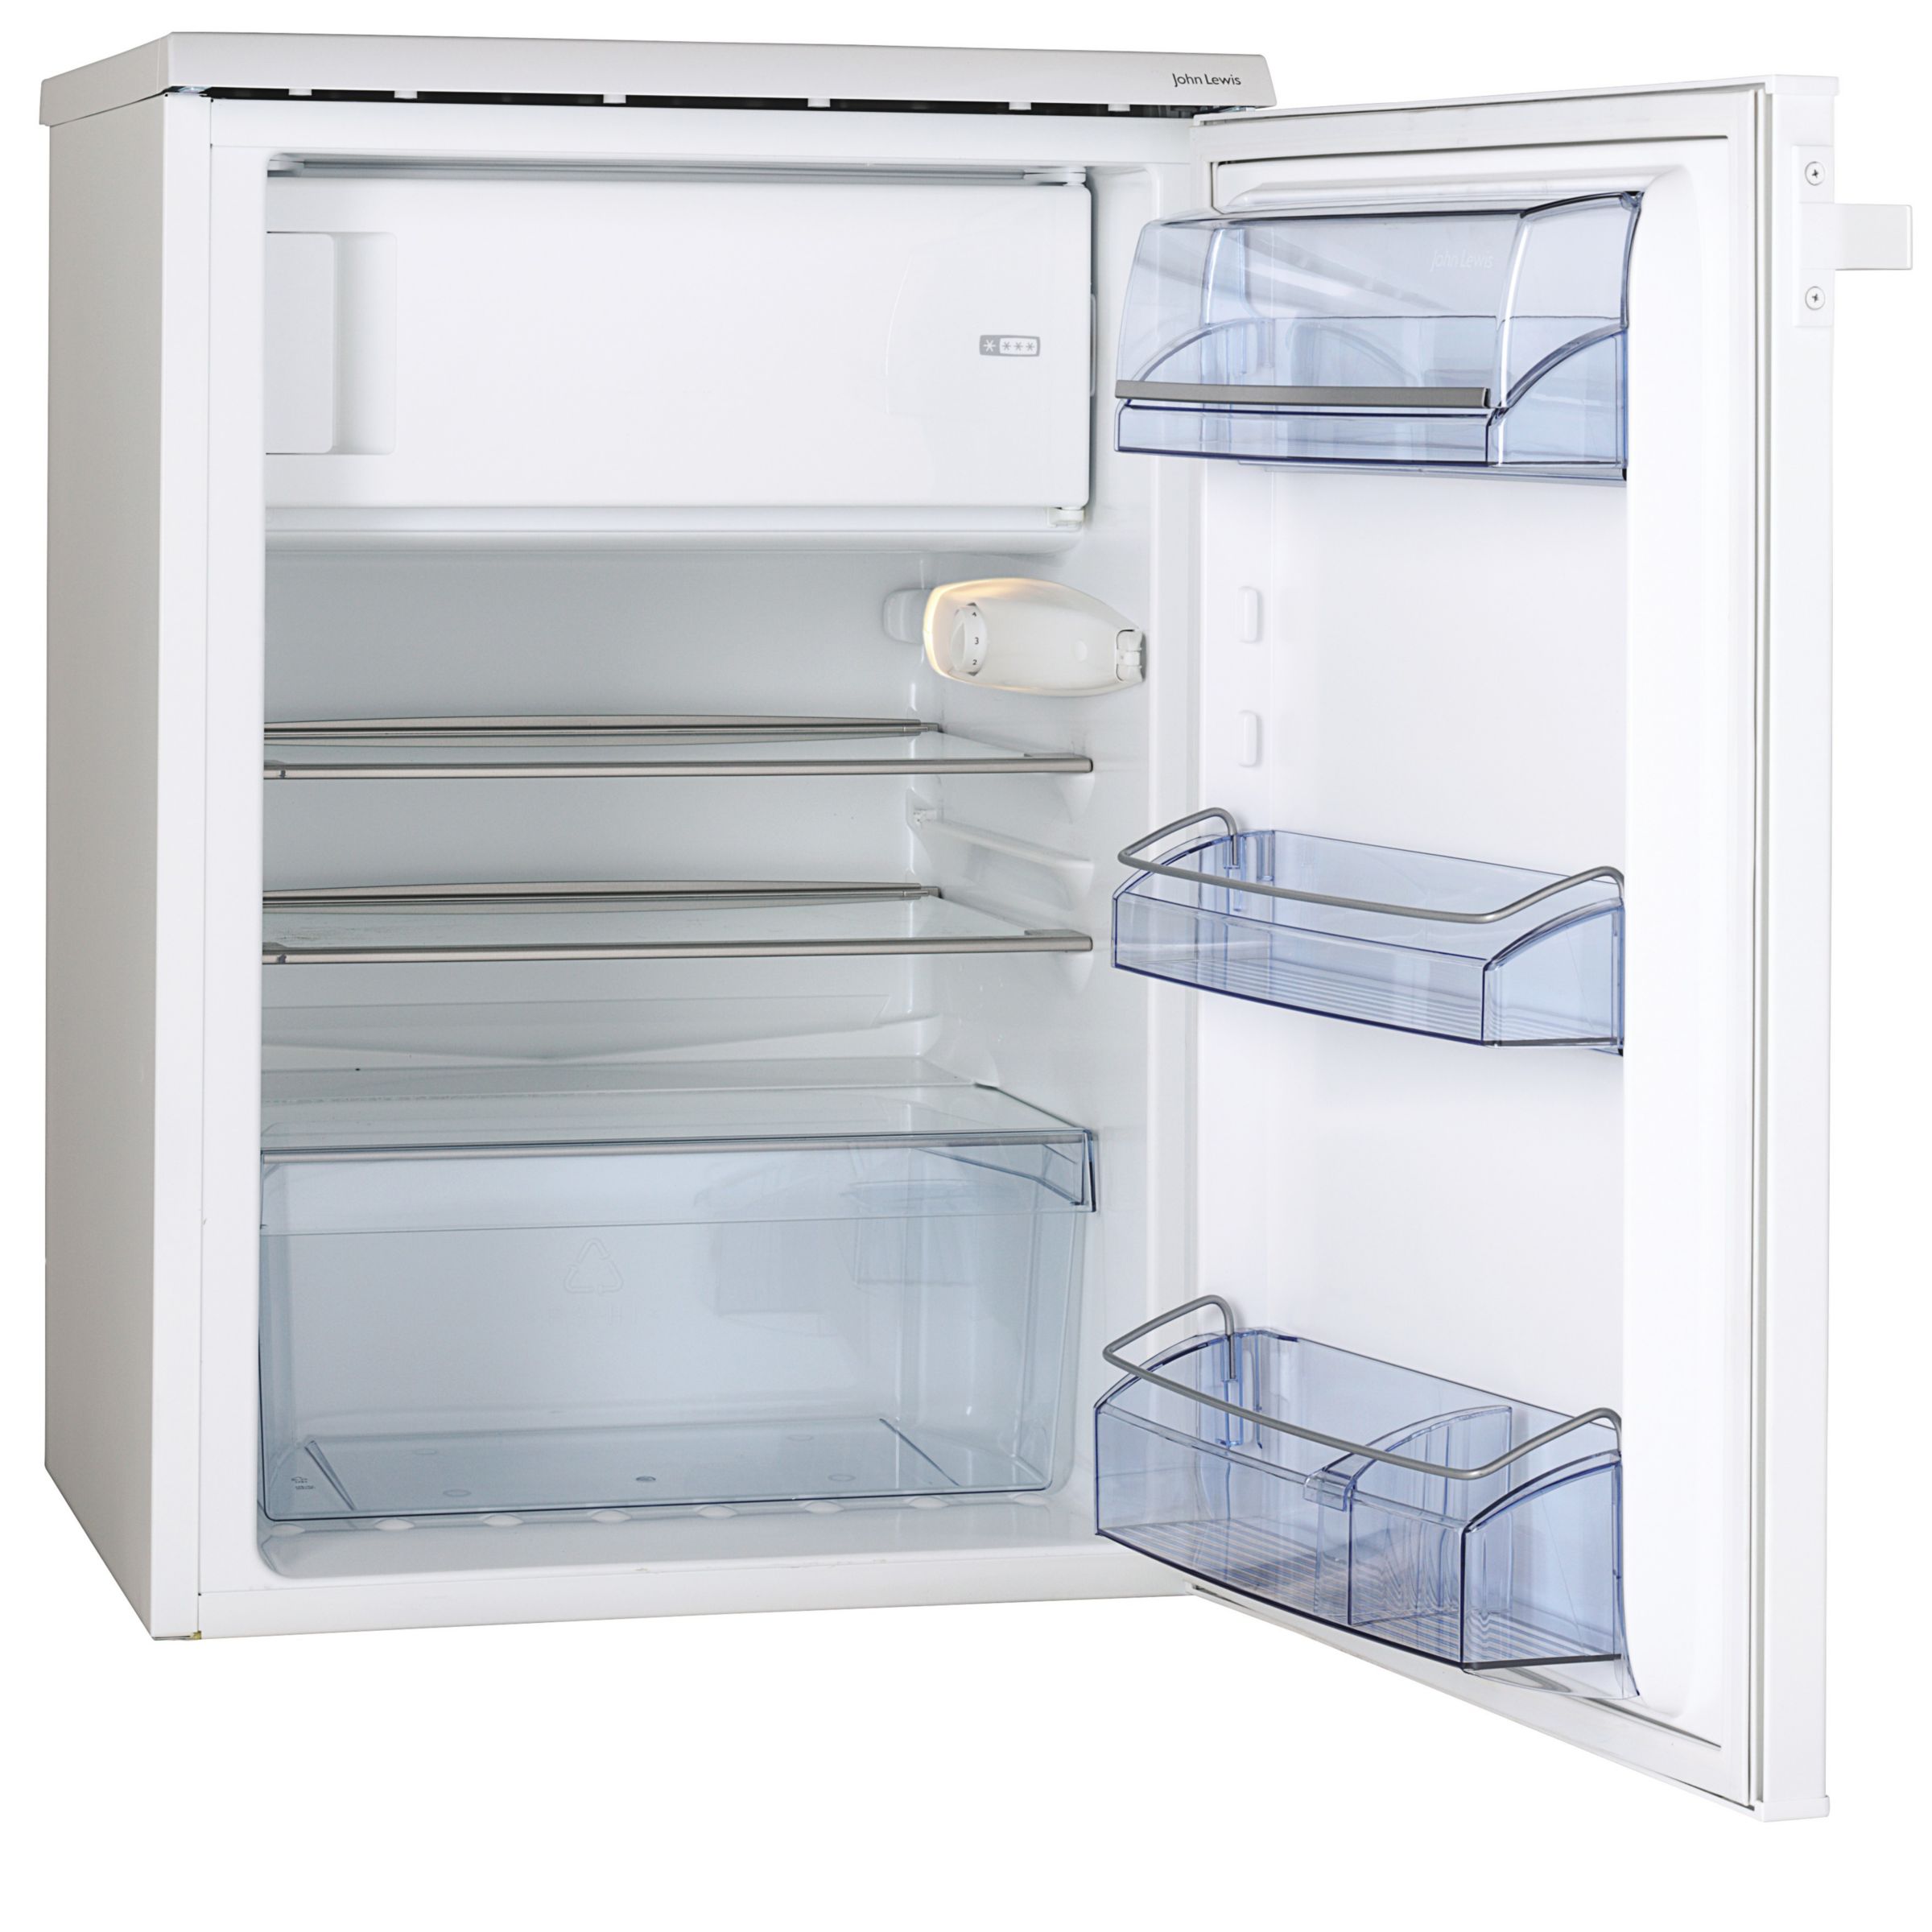 John Lewis & Partners JLUCFR6012 Undercounter Fridge with Freezer Compartment, A+ Energy Rating 